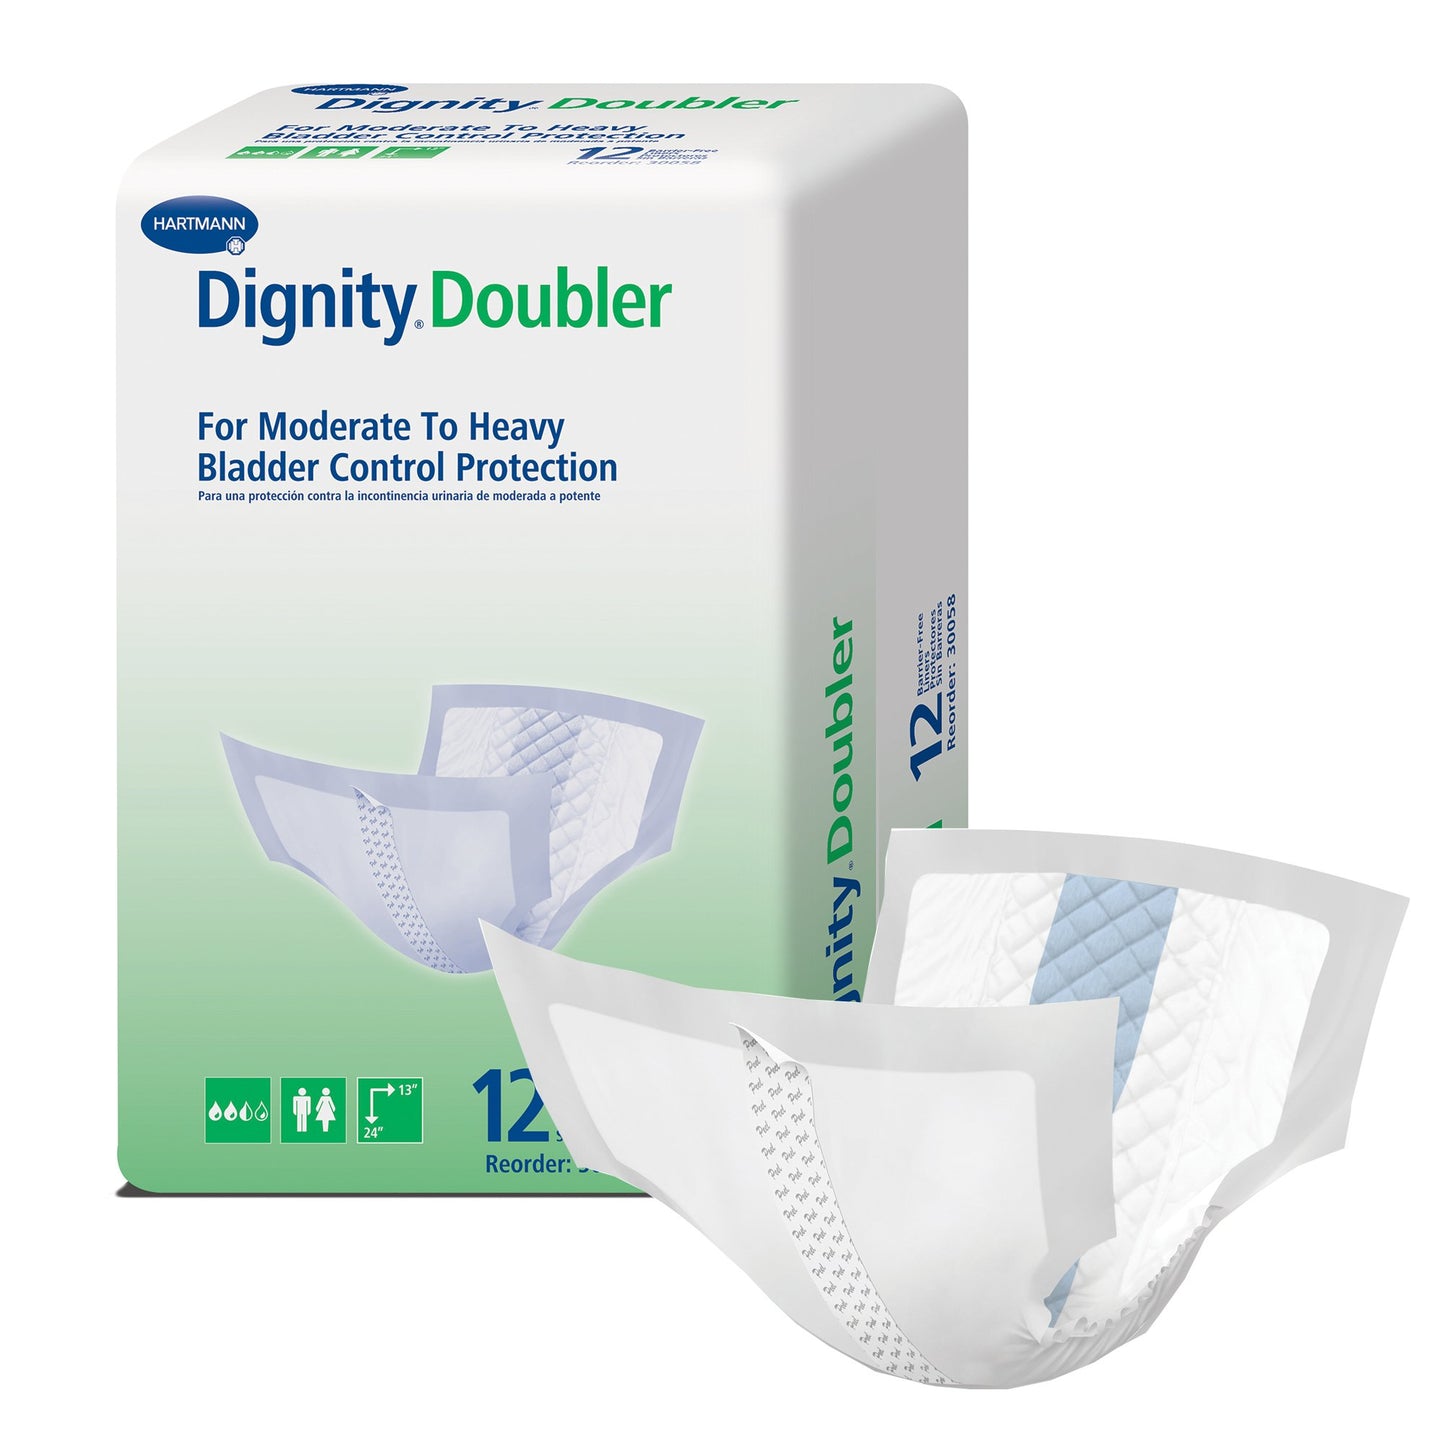 Dignity Doubler For Moderate to Heavy Bladder Control Pad, 24-Inch Length